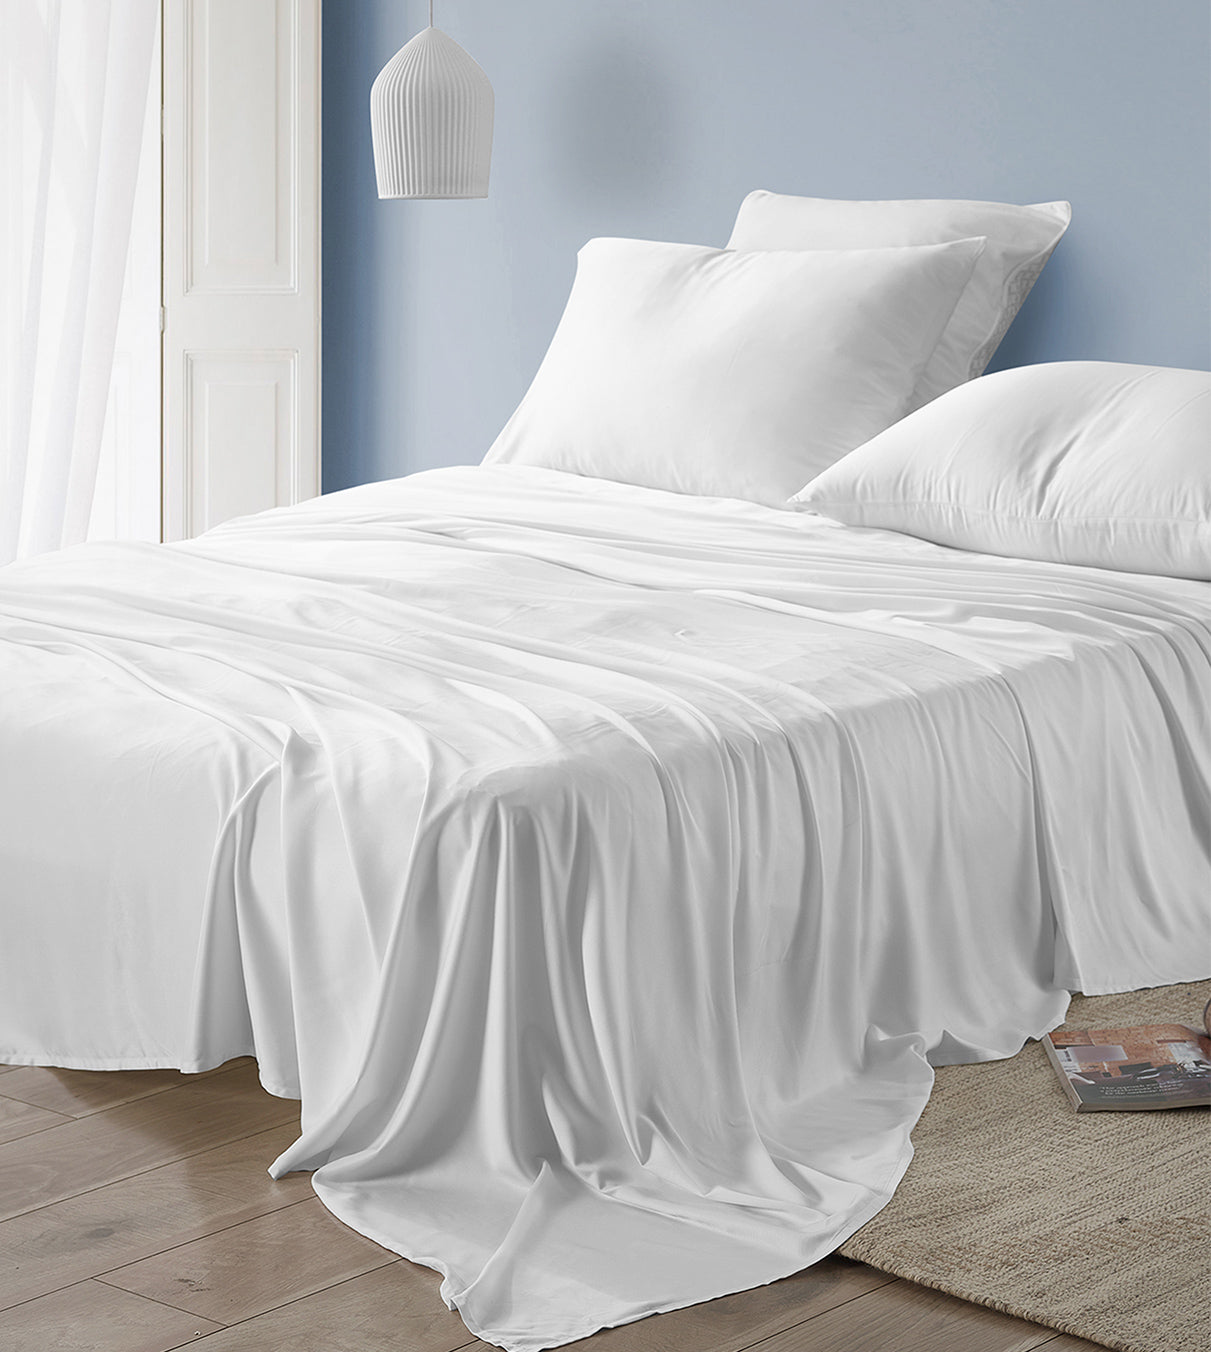 Product: Cooling Bamboo Sateen Sheet Set | Color: White